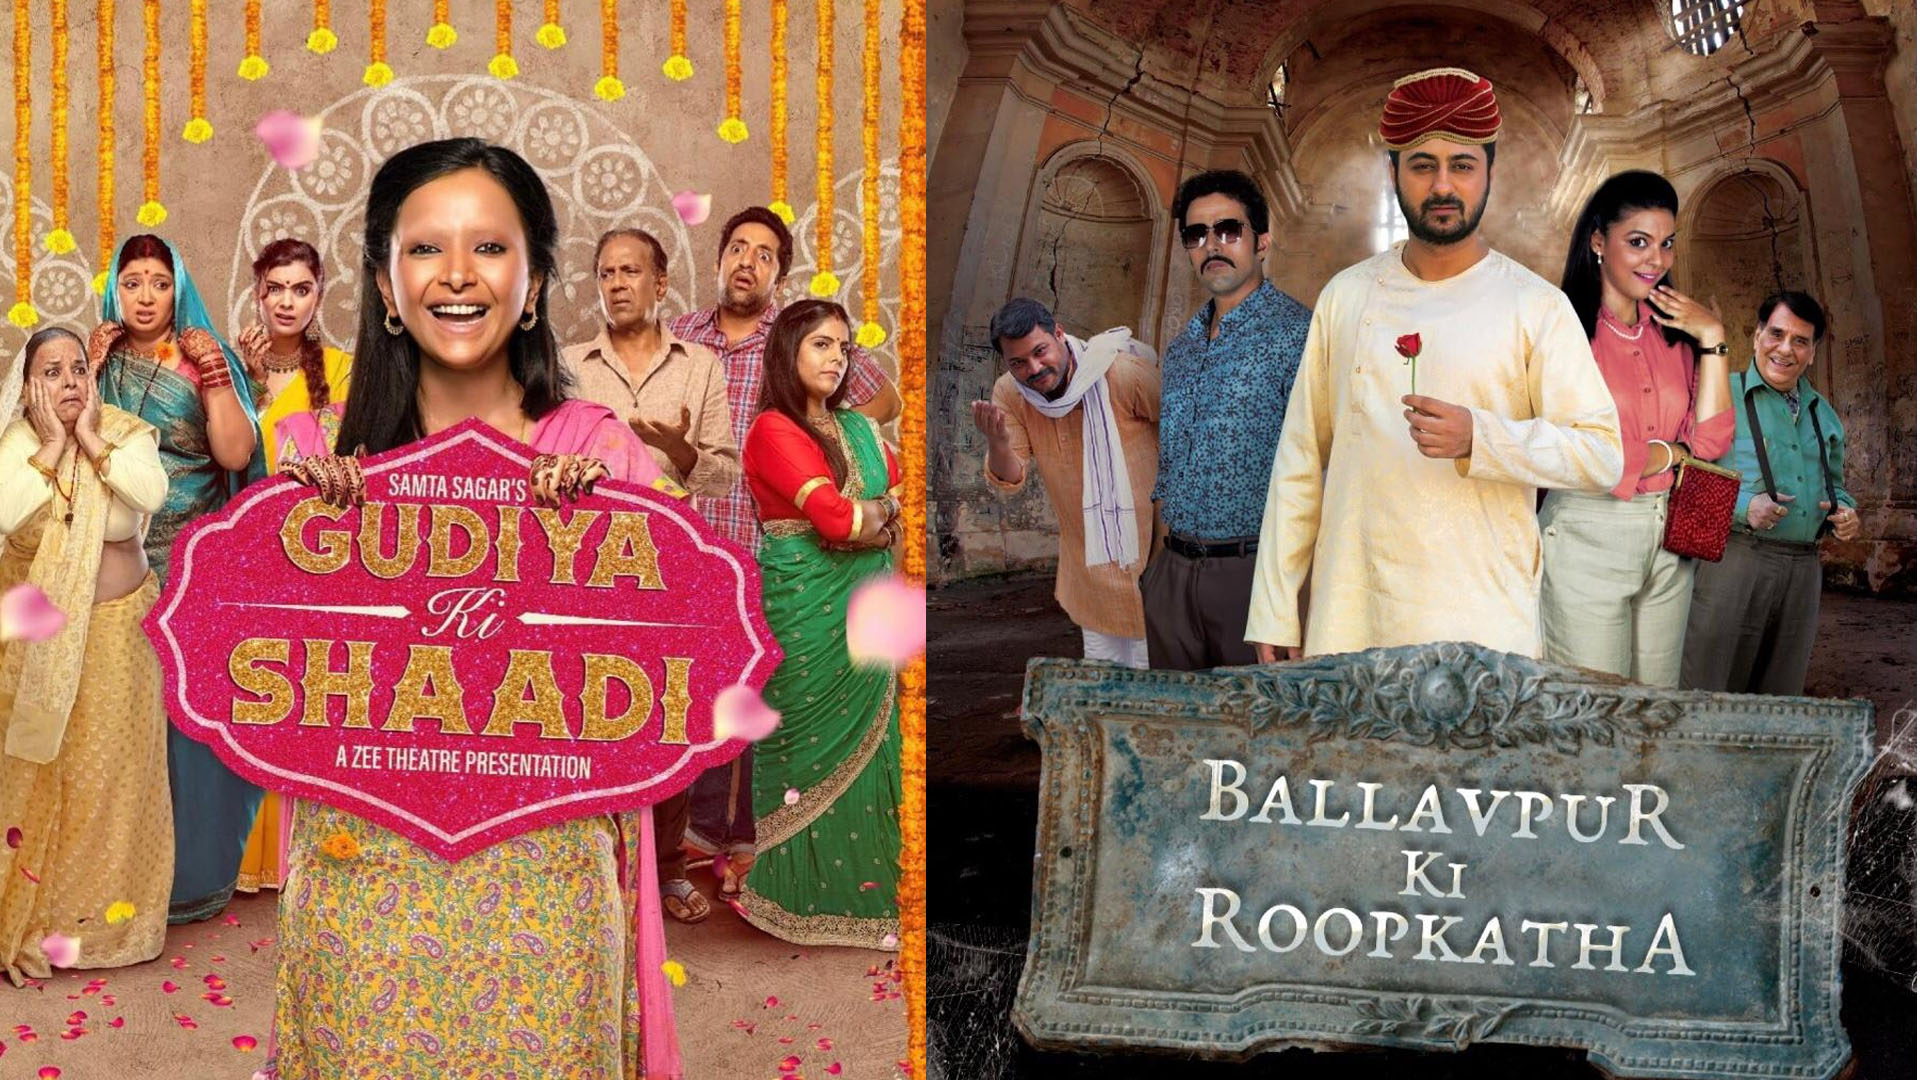 Usher in the new year with Zee Theatre’ s heart-warming family dramas on Tatasky Theatre